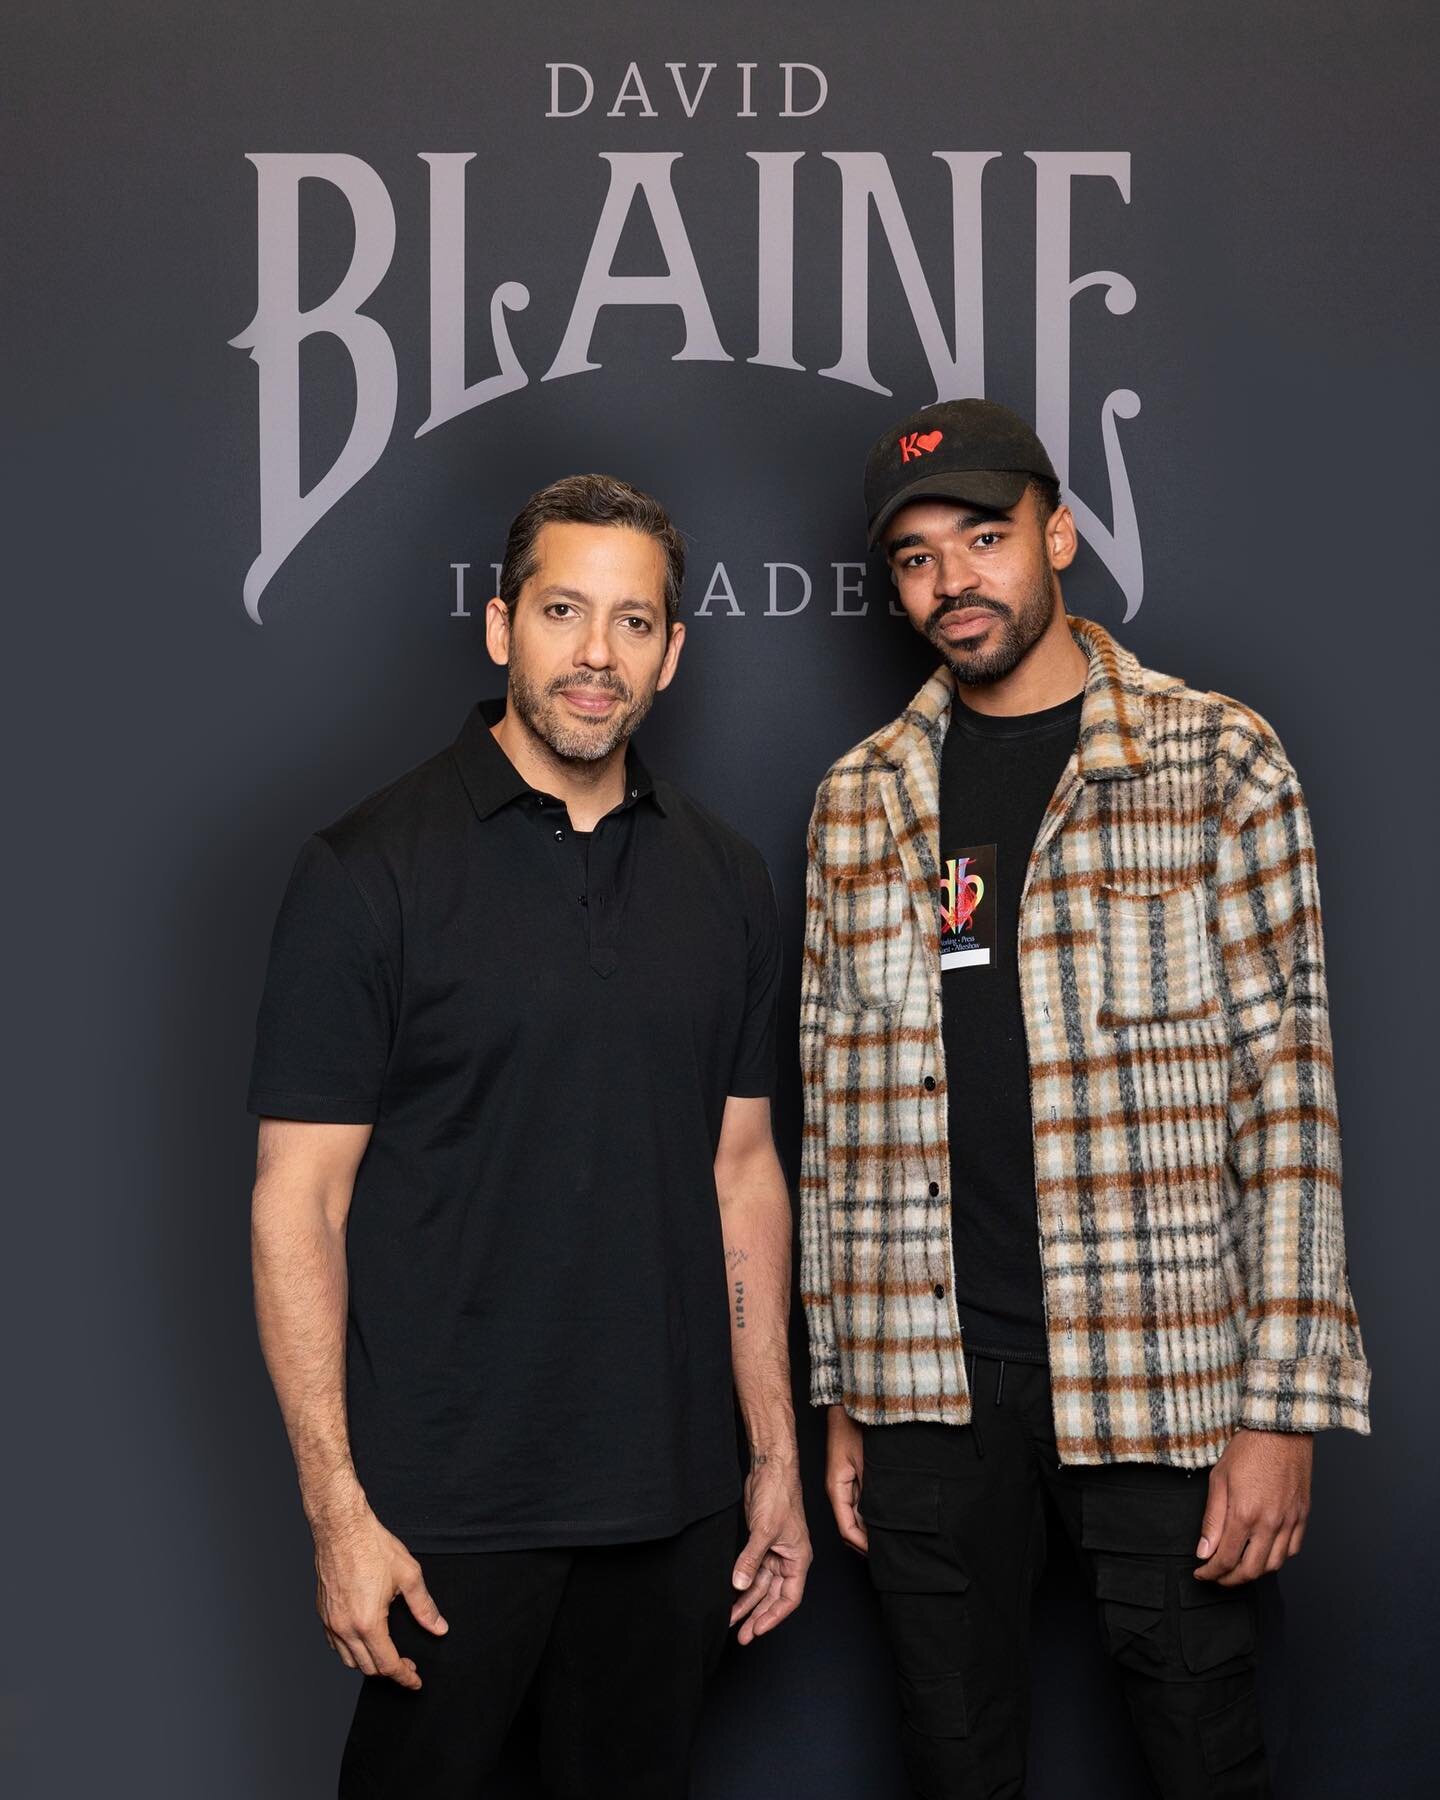 I recently went to Las Vegas to perform at some private events/shoot street magic and ended up meeting someone I&rsquo;ve admired for a long time. My favorite magician, @davidblaine. I can&rsquo;t even use words to describe how surreal these moments 